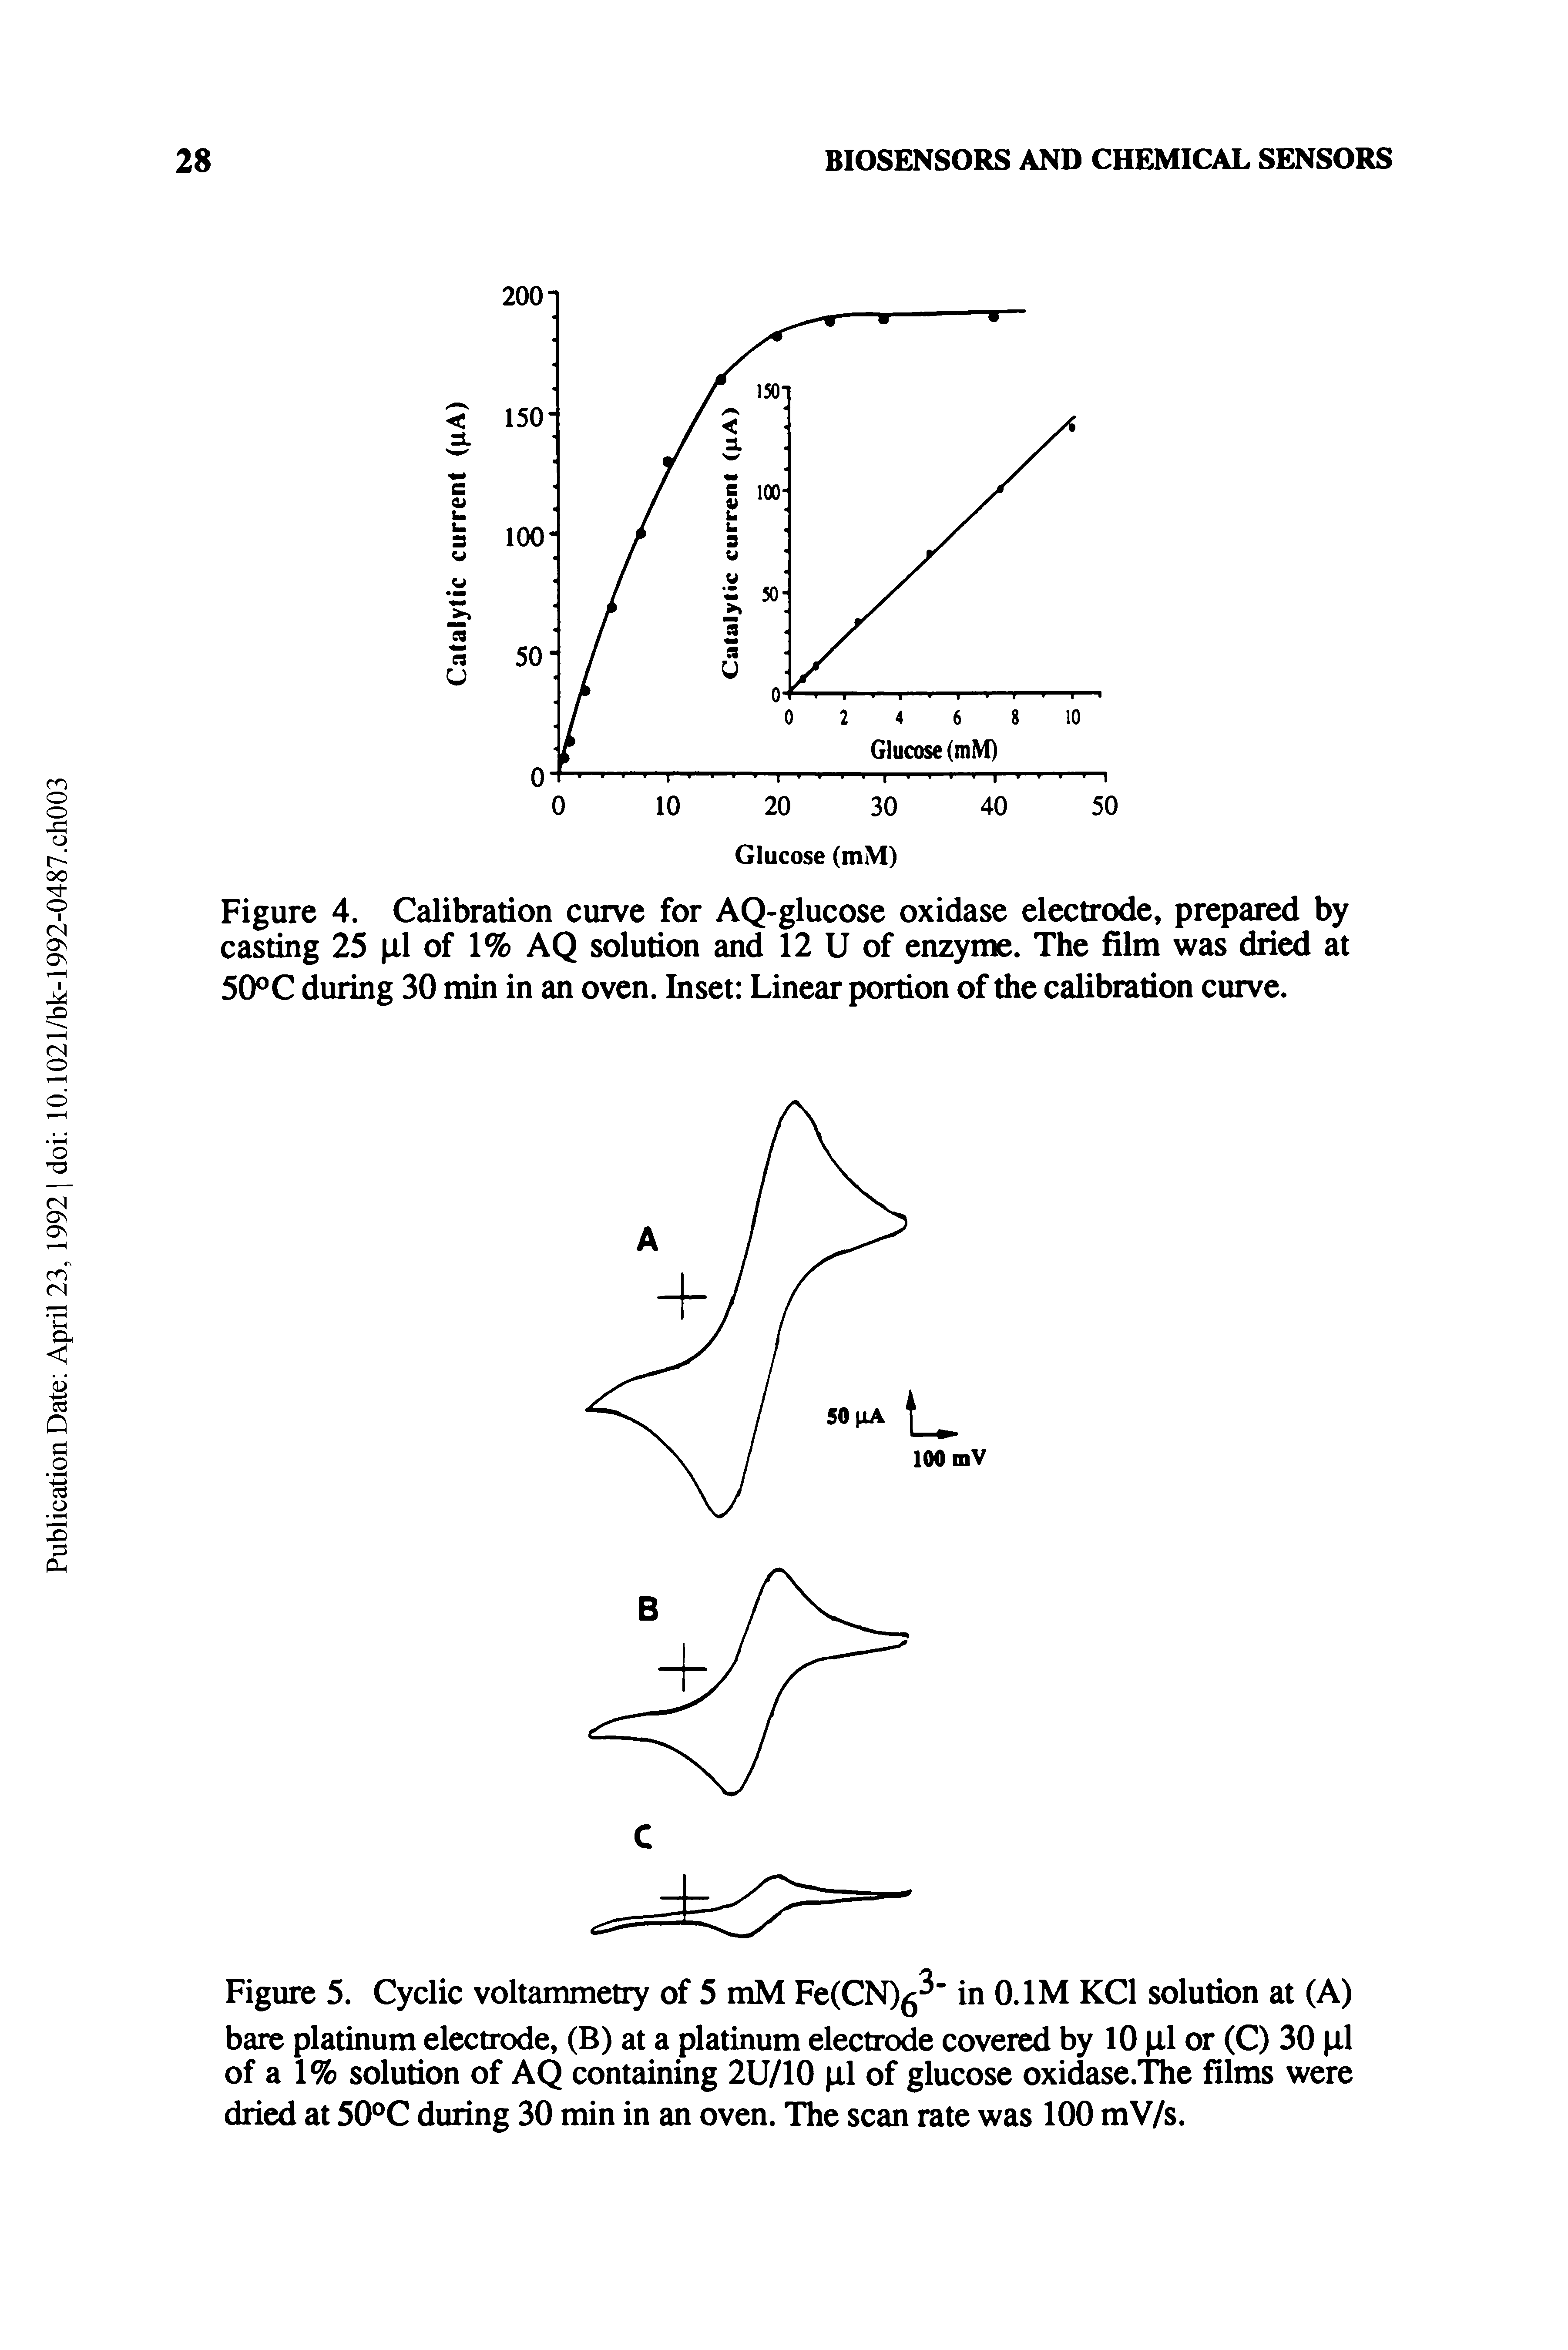 Figure 4. Calibration curve for AQ-glucose oxidase electrode, prepared by casting 25 il of 1% AQ solution and 12 U of enzyme. The film was dried at 50°C during 30 min in an oven. Inset Linear portion of the calibration curve.